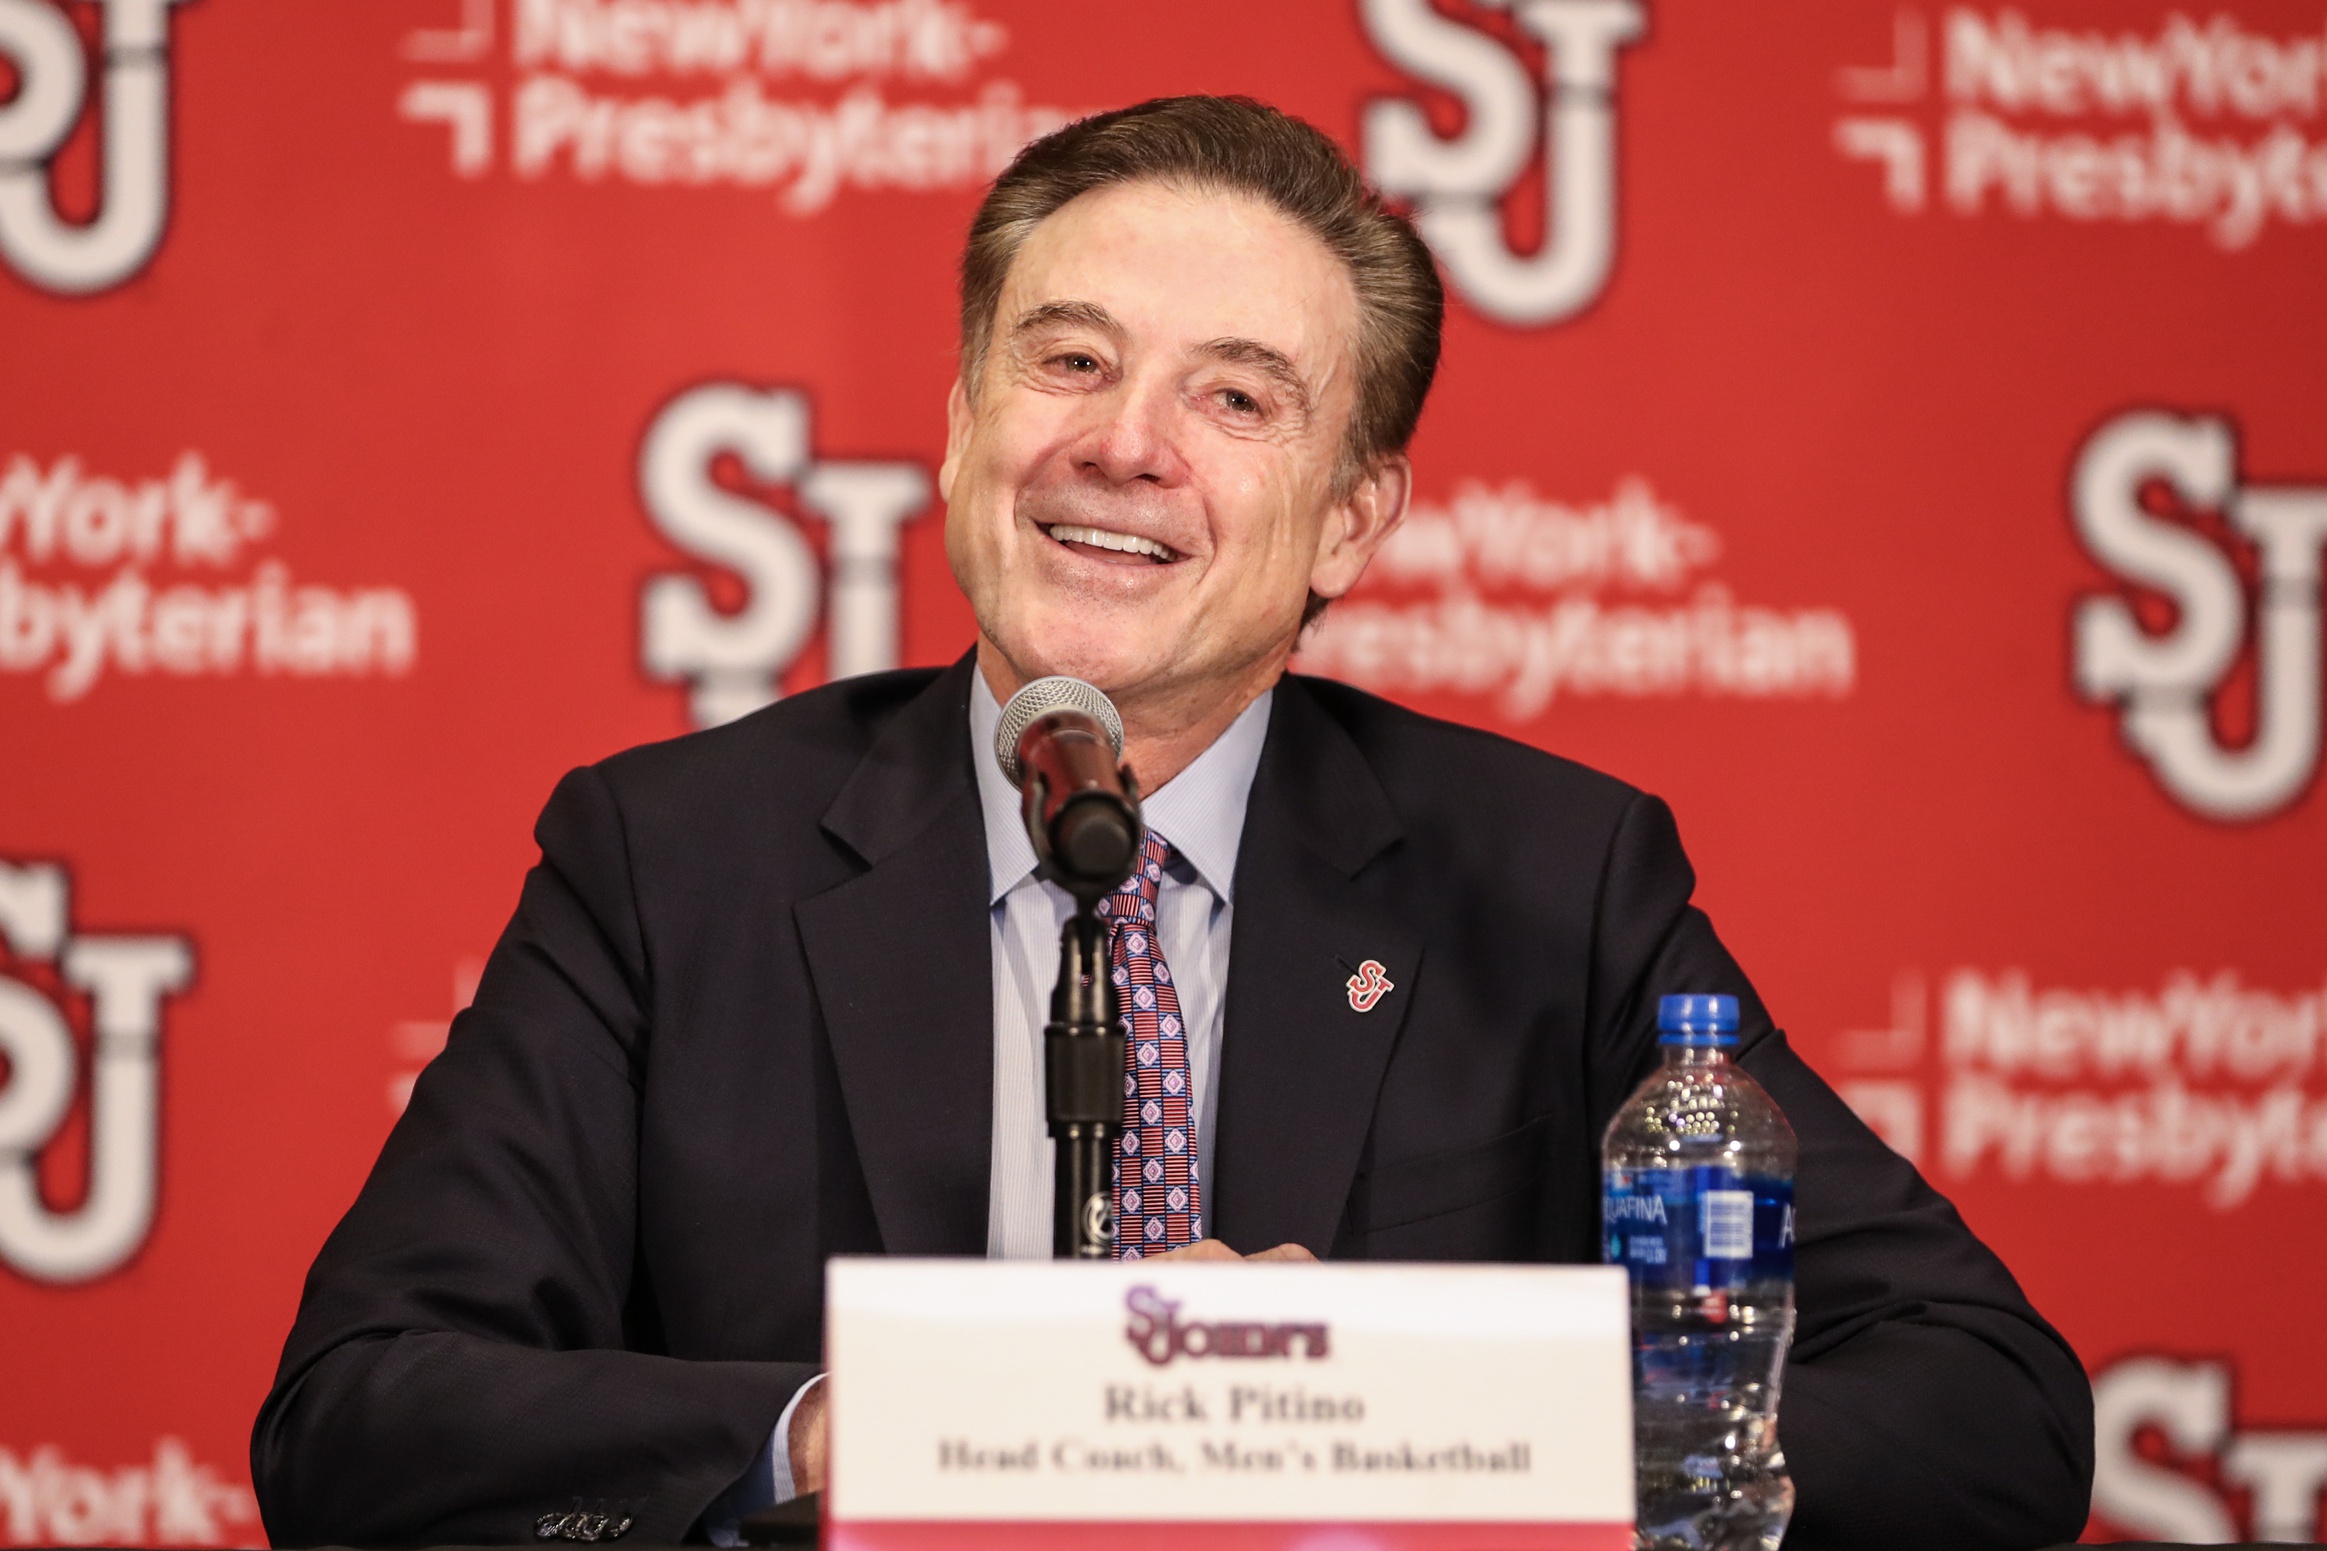 Mar 21, 2023; New York, NY, USA; New St. John’s Red Storm head coach Rick Pitino speaks at his introductory press conference at Madison Square Garden. Mandatory Credit: Wendell Cruz-USA TODAY Sports